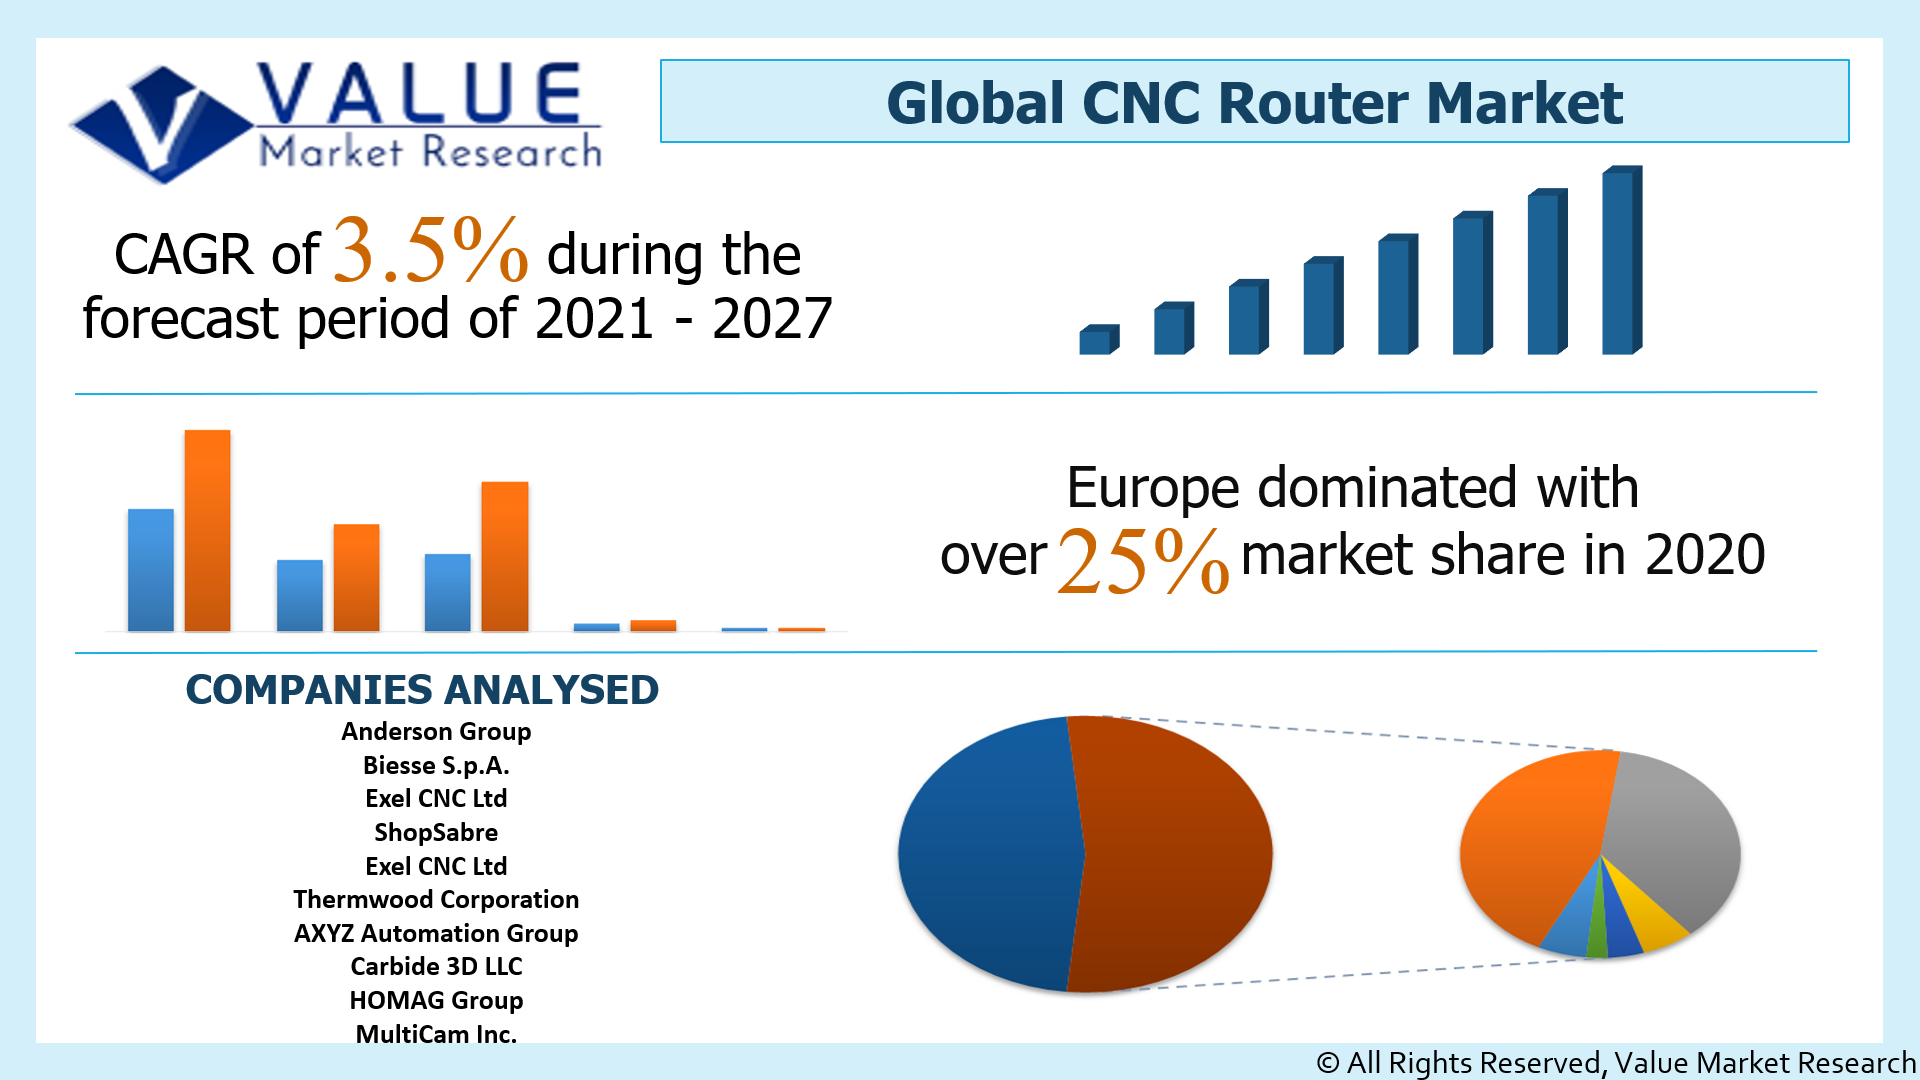 Global CNC Router Market Share